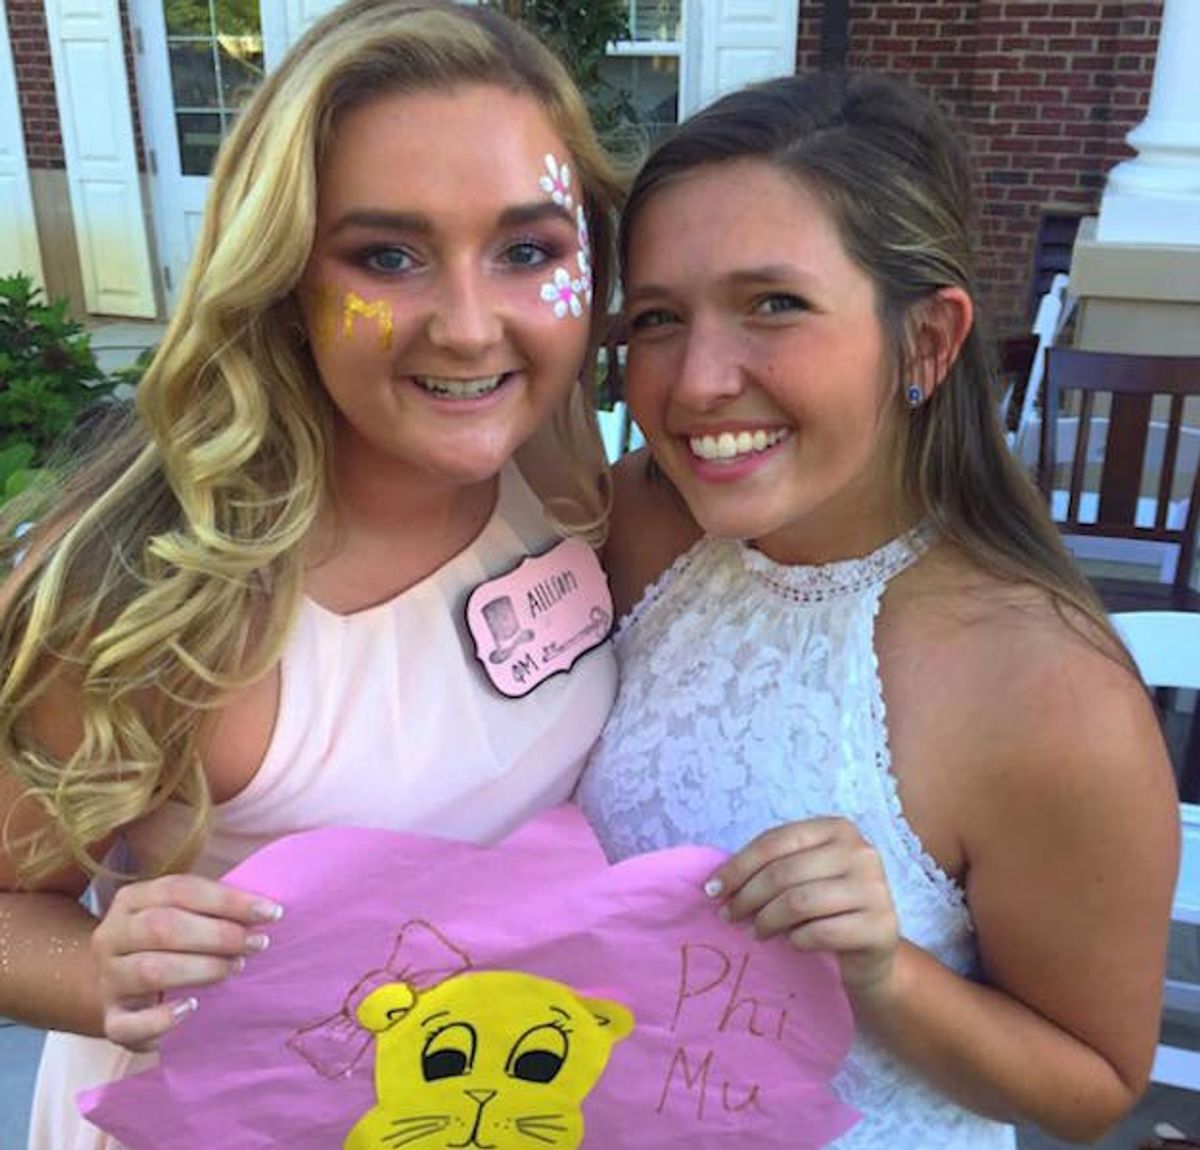 Stop Questioning Mandatory Sorority Events, And Just Enjoy Them